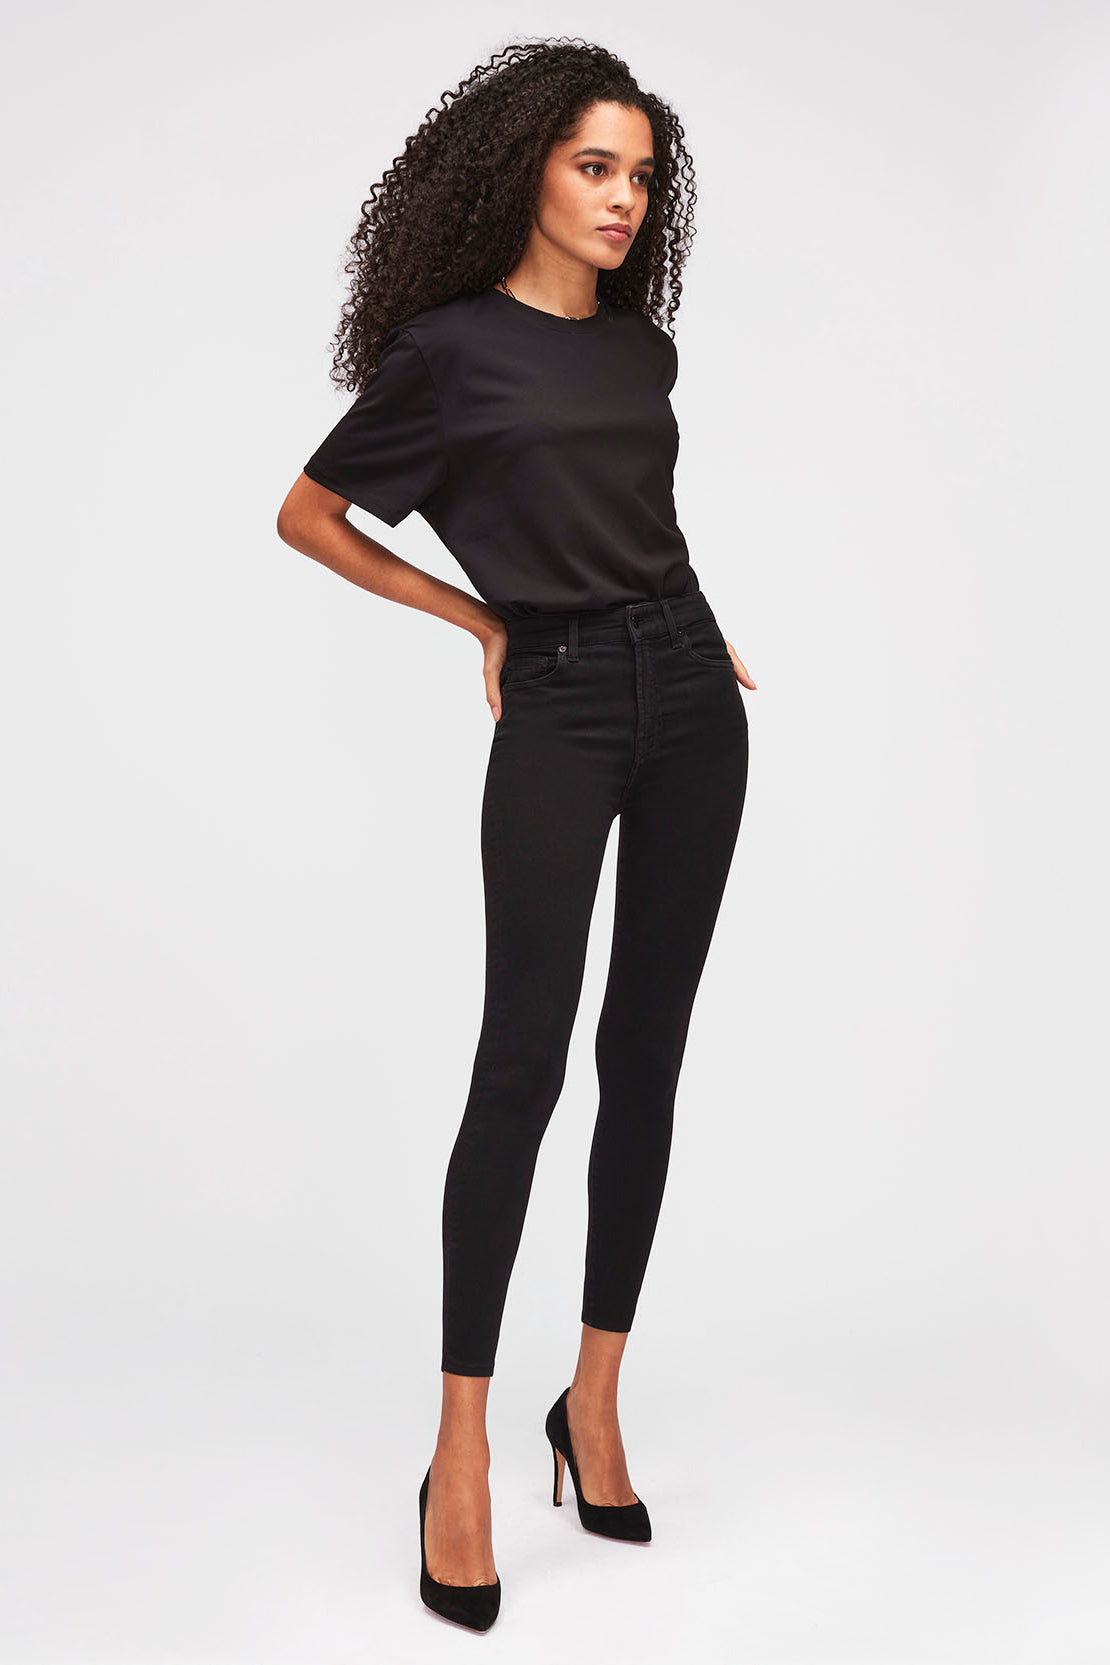 black  high rise skinny jeans by 7 for all mankind